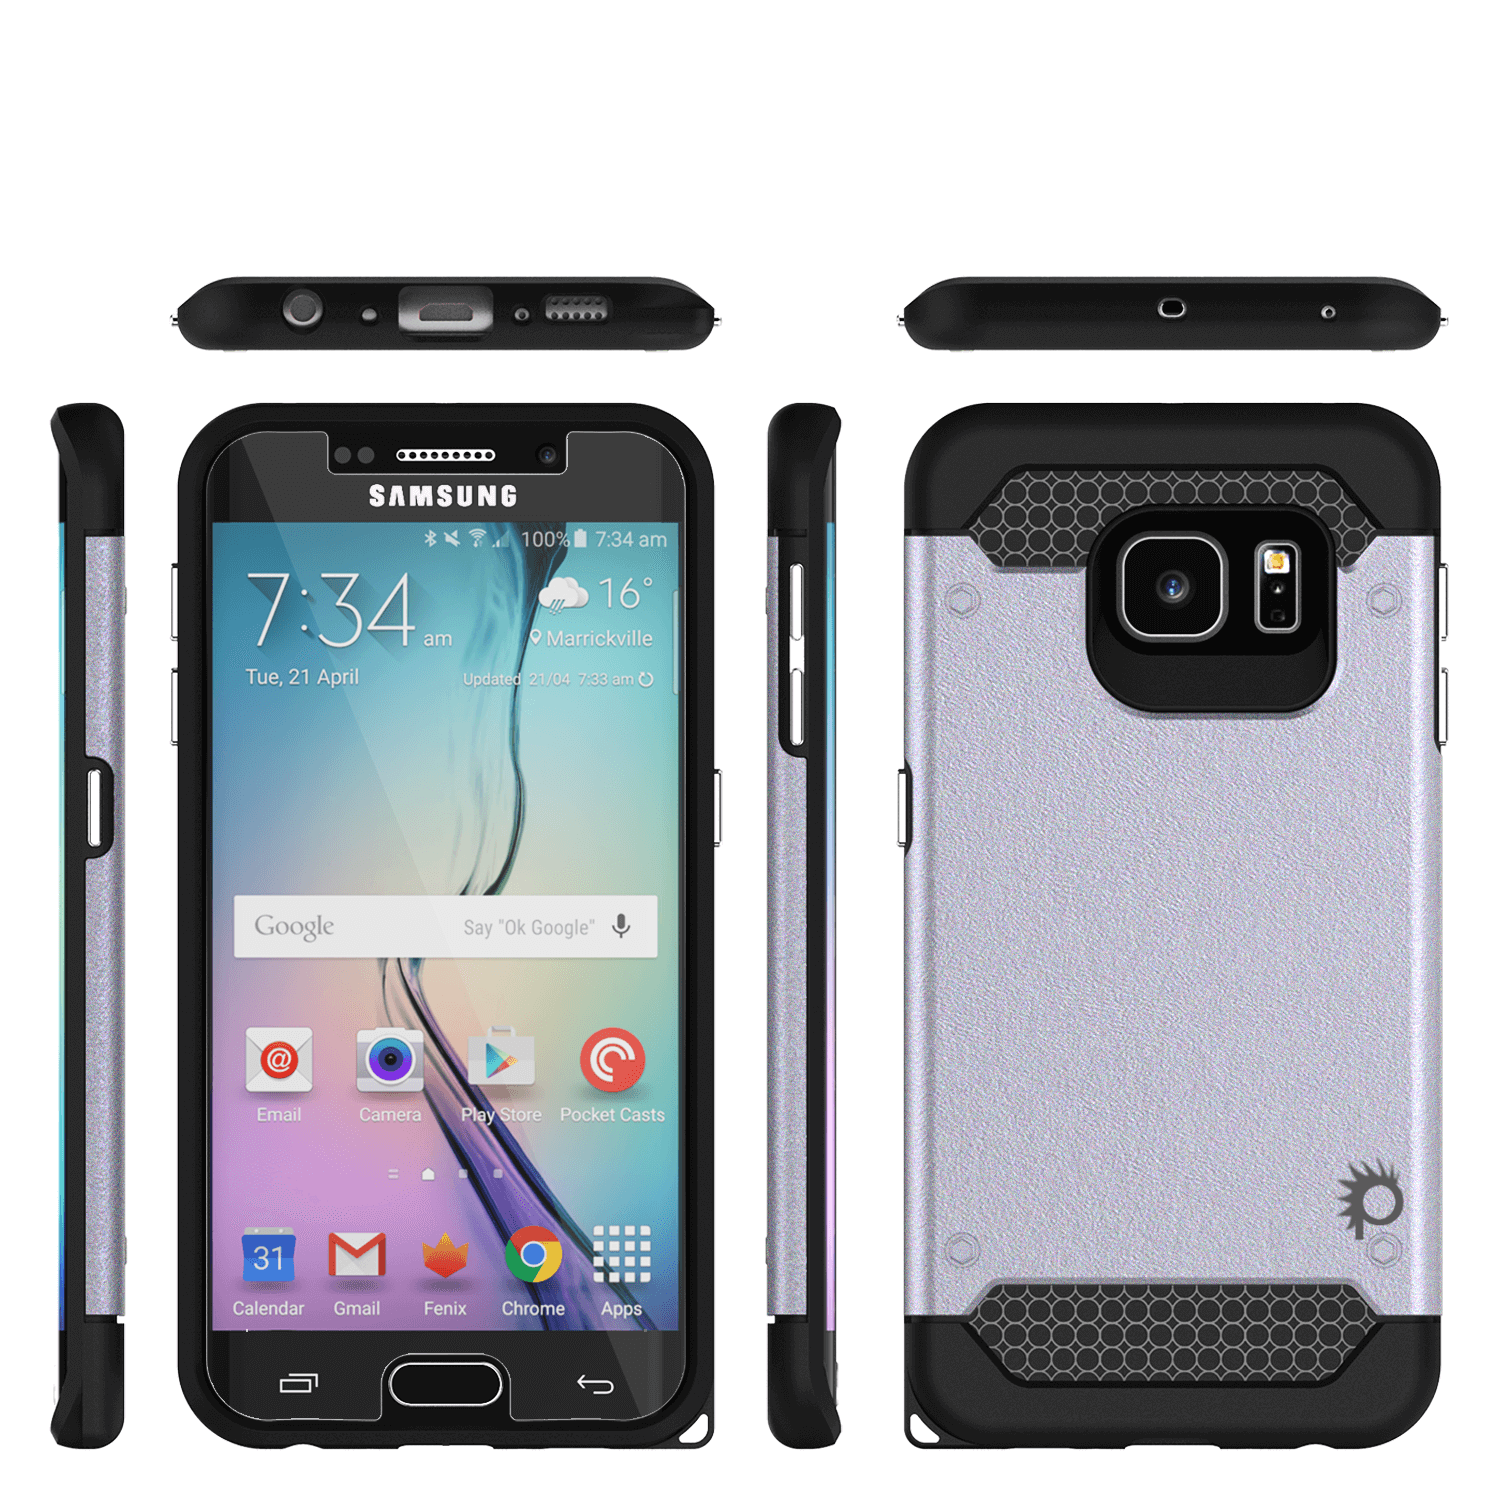 Galaxy s6 EDGE Case PunkCase Galactic SIlver Series Slim Armor Soft Cover w/ Screen Protector